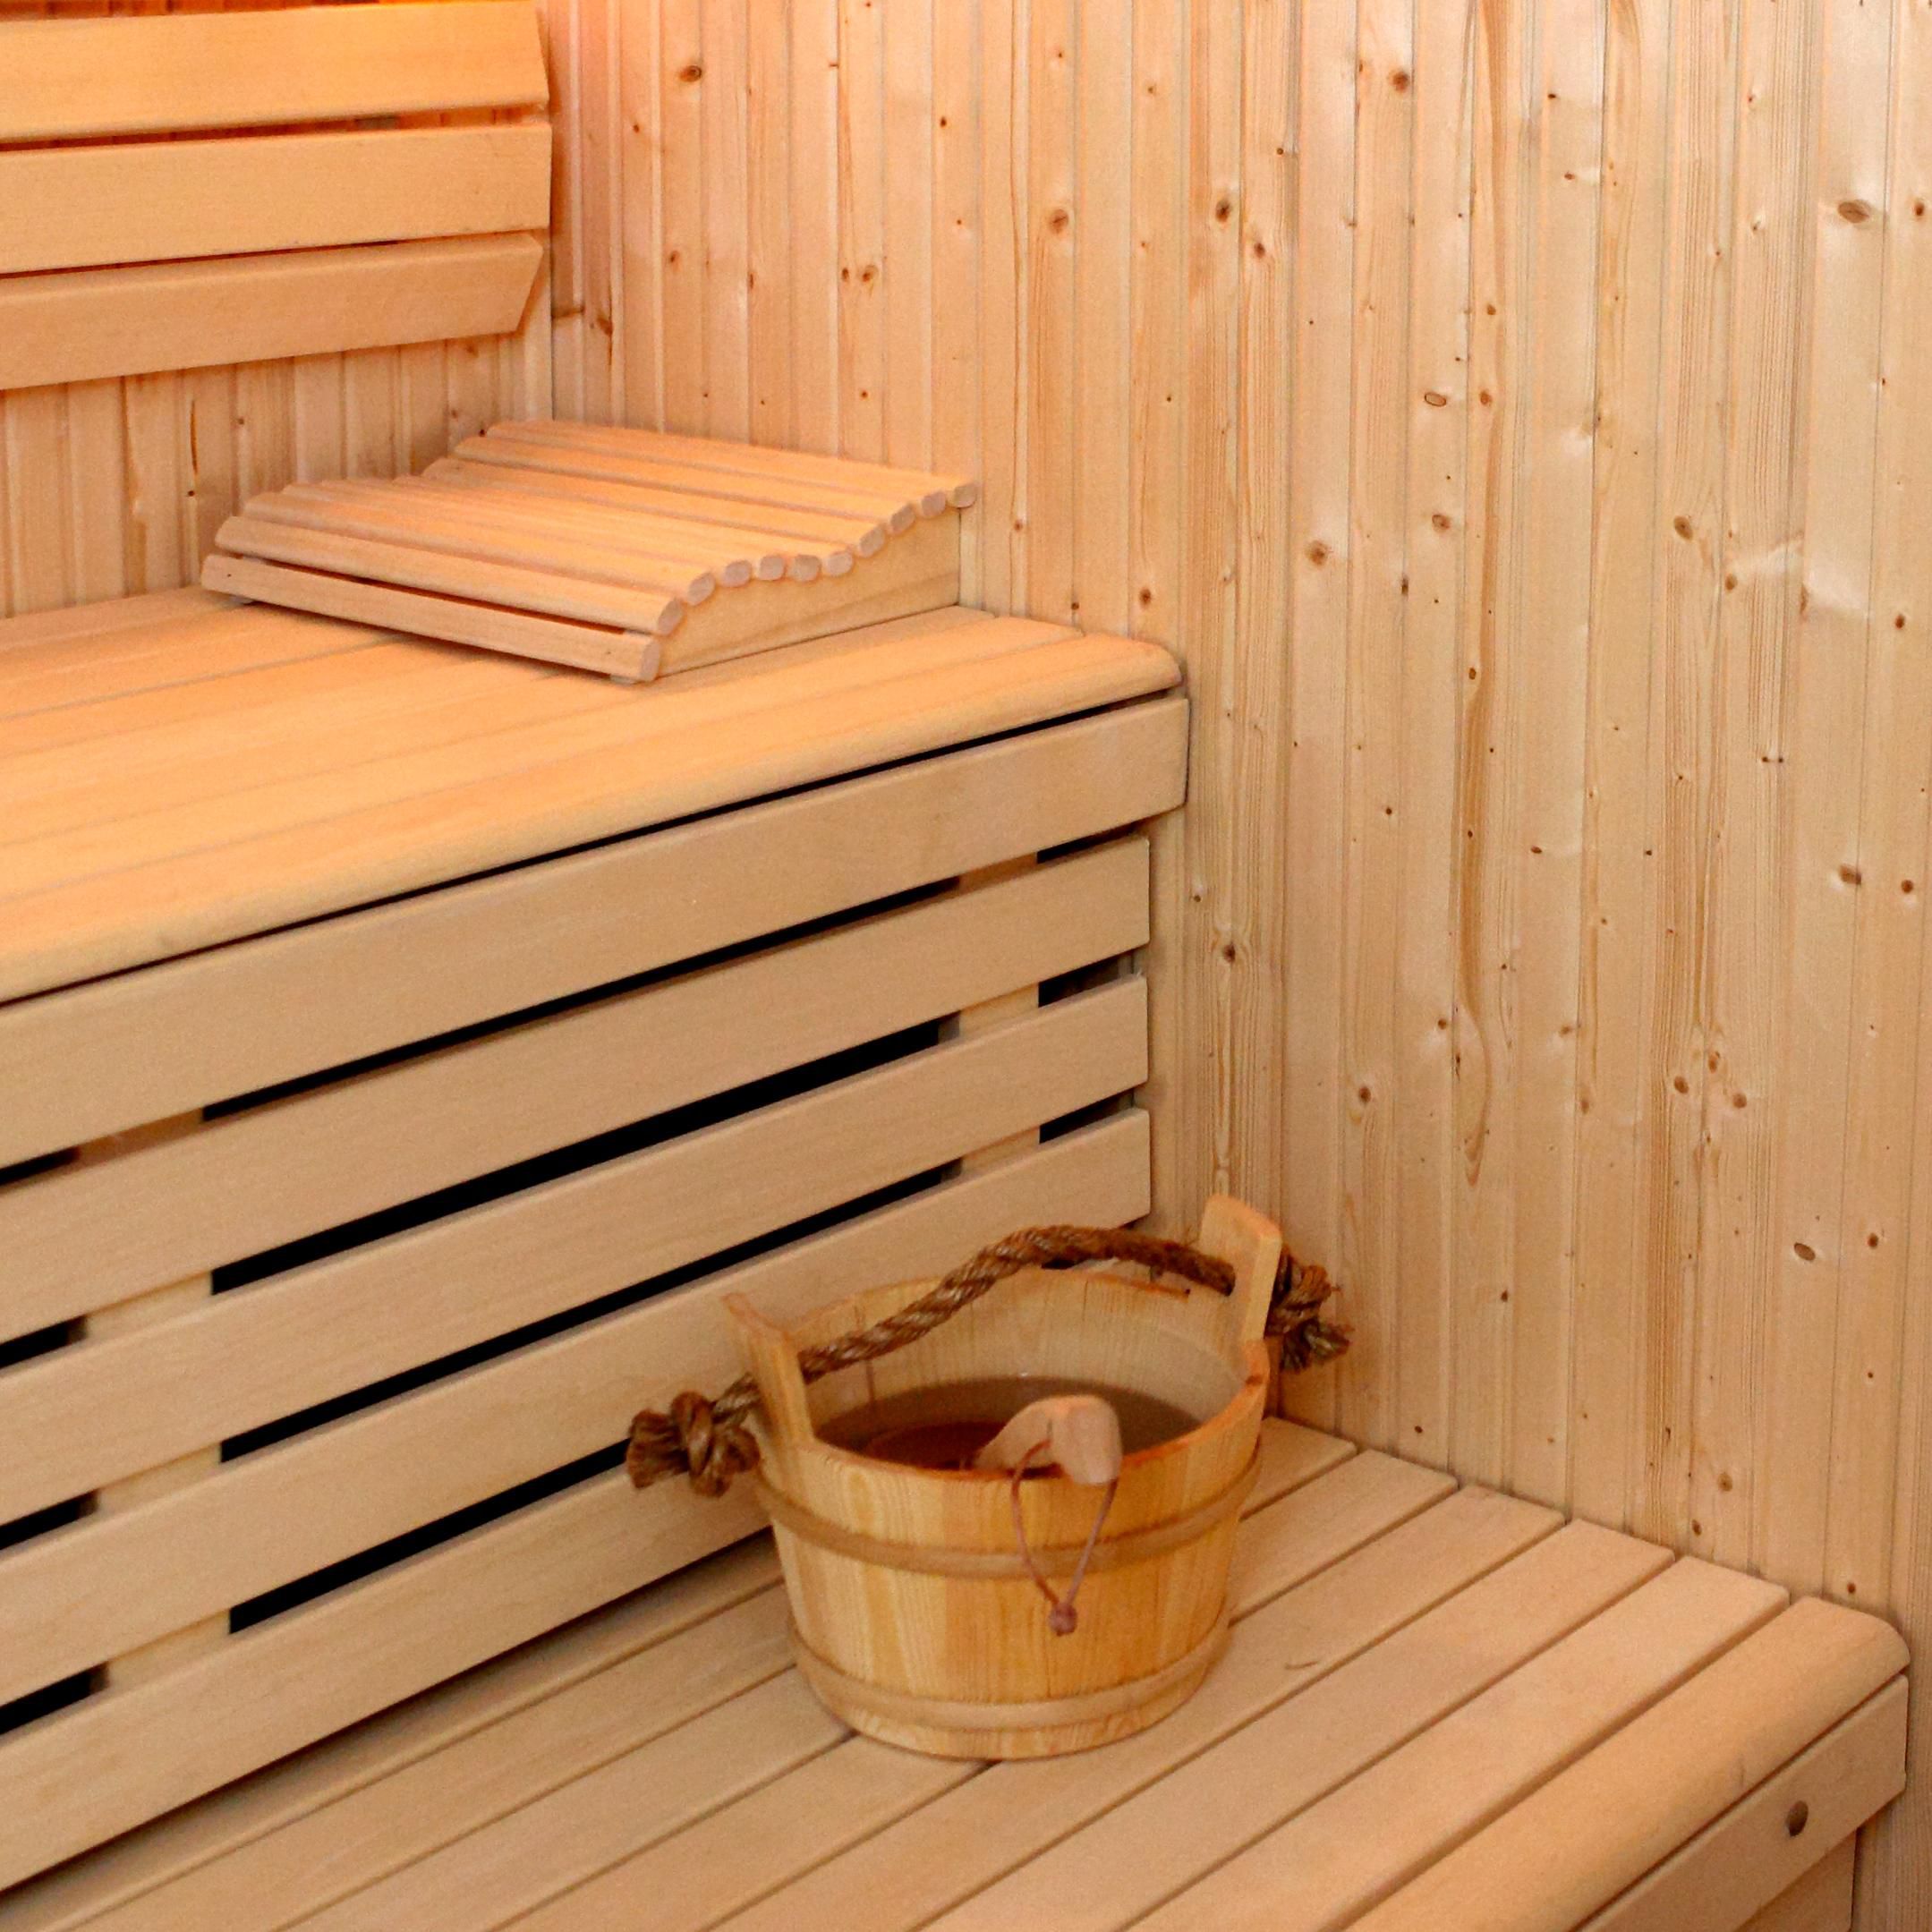 Unwind with a therapeutic sauna or steam bath session.